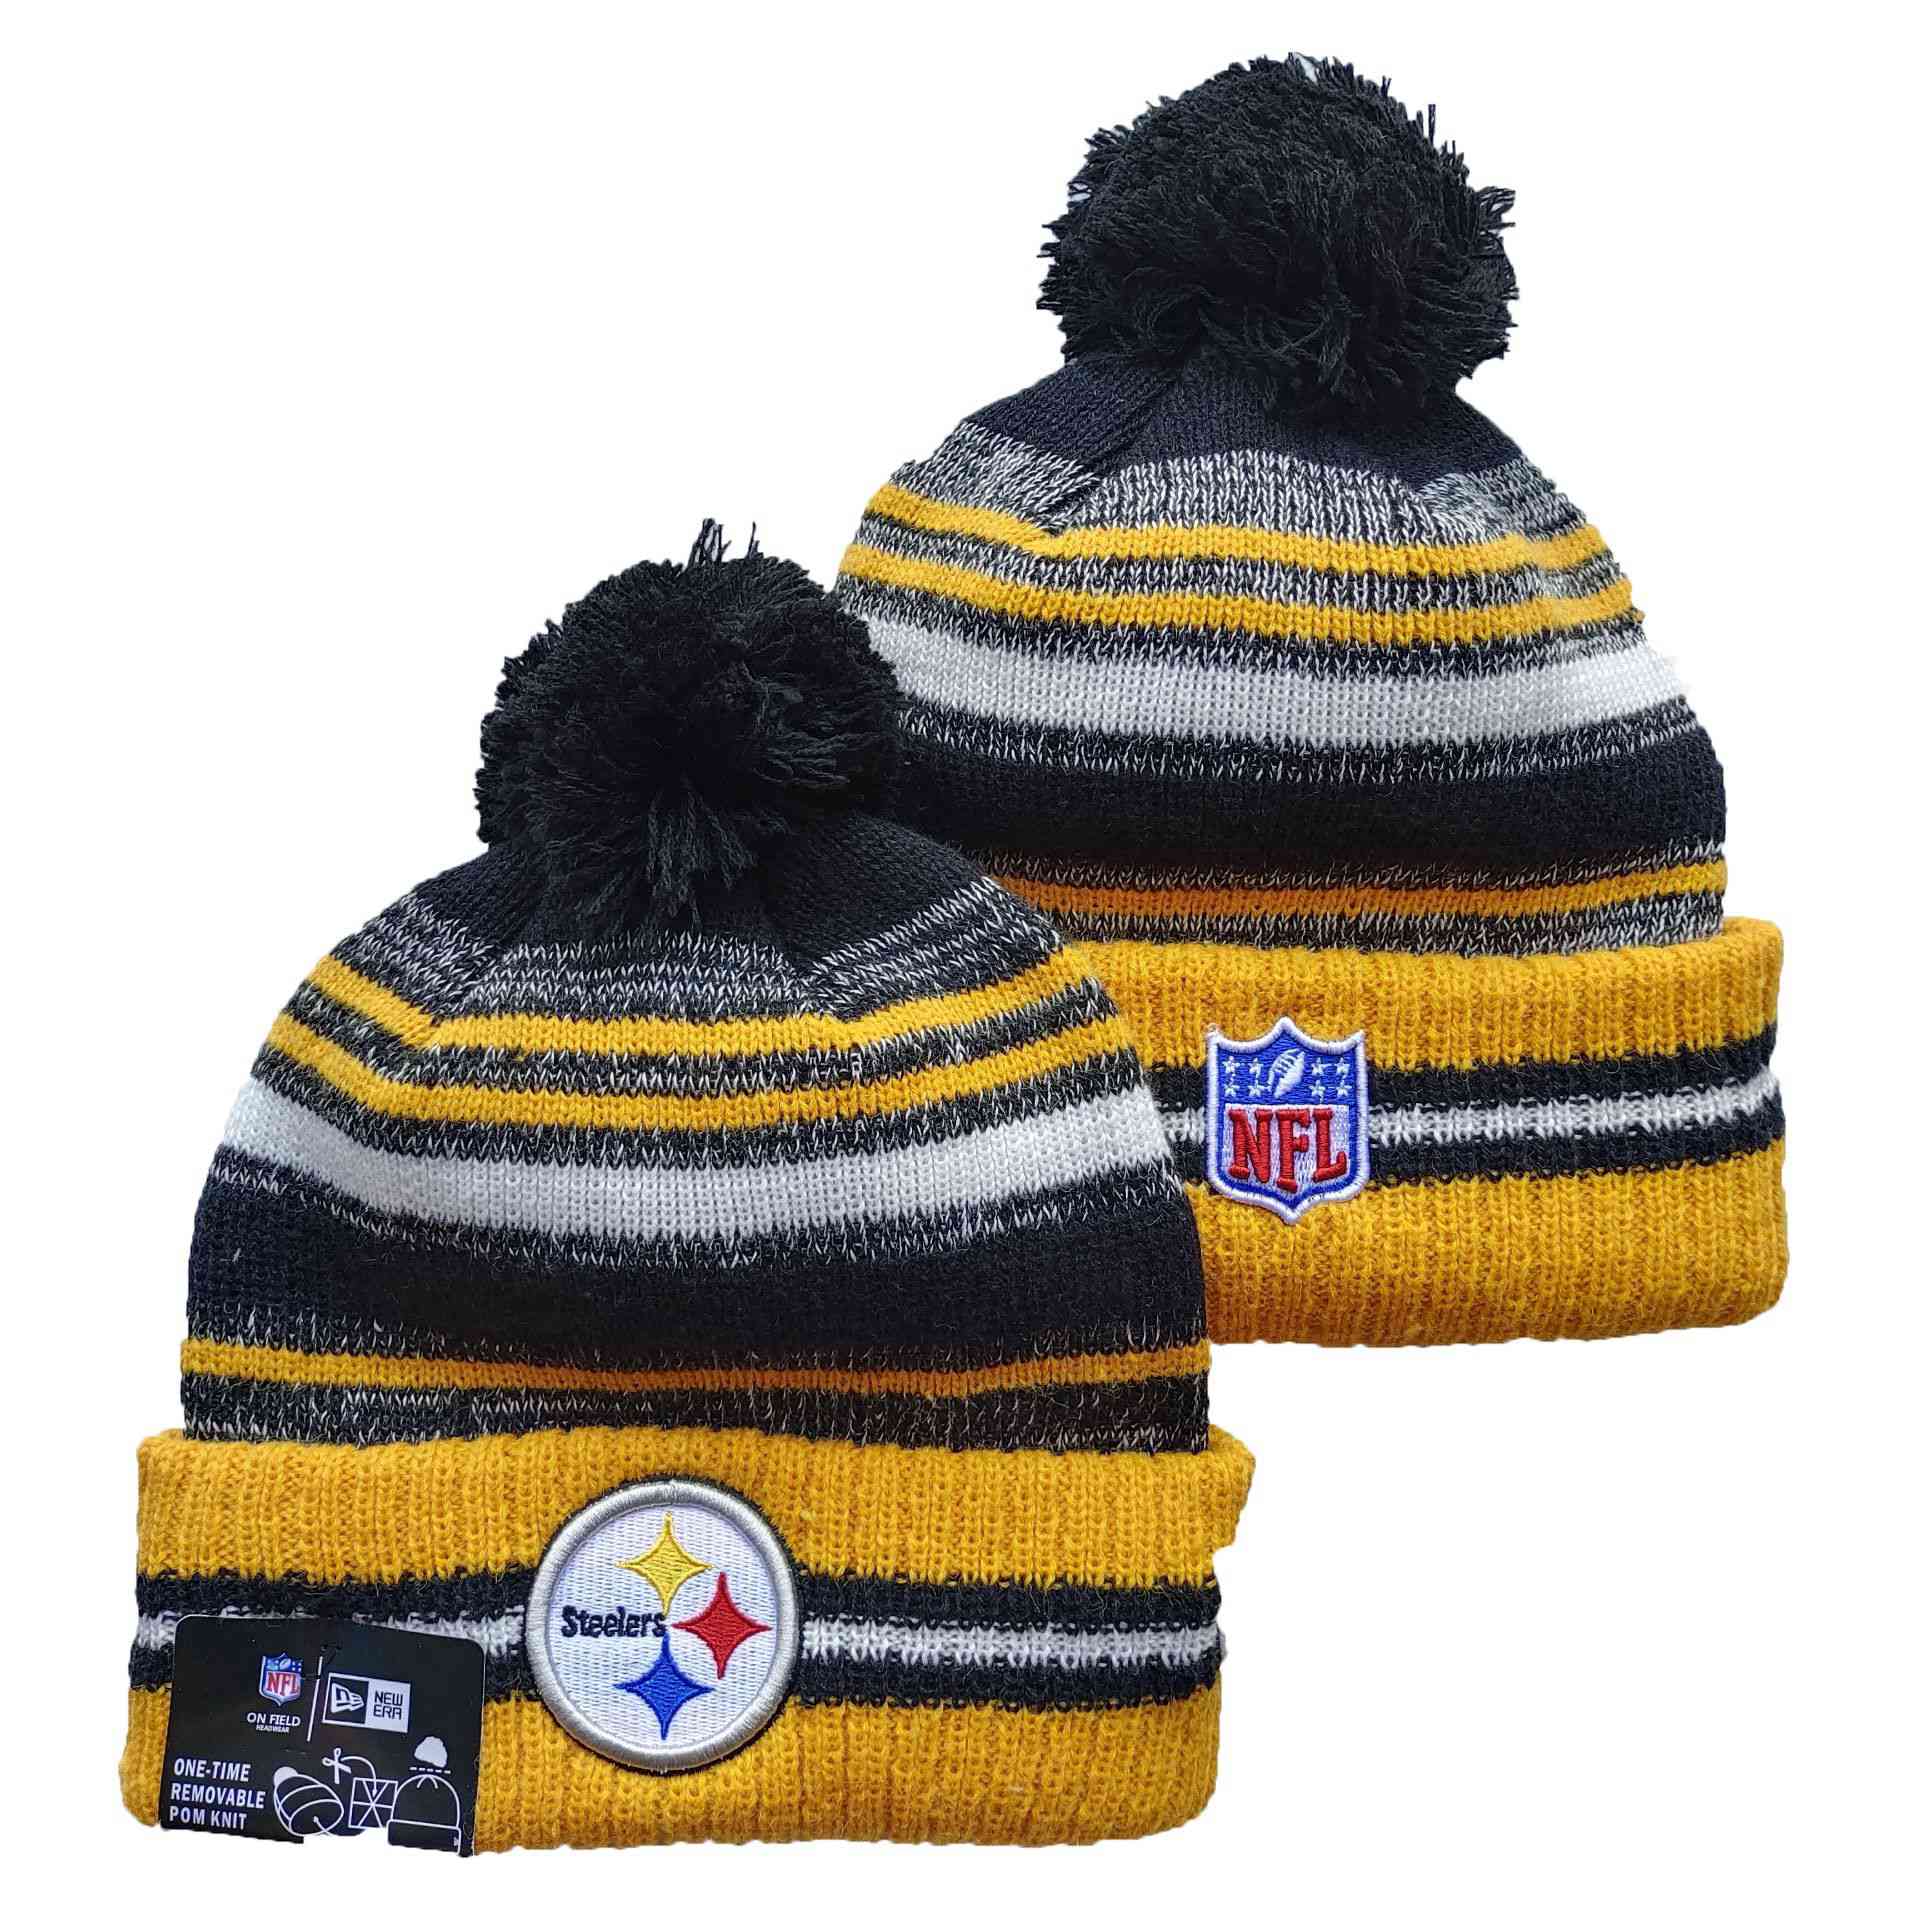 NFL Pittsburgh Steelers Beanies Knit Hats-YD1165